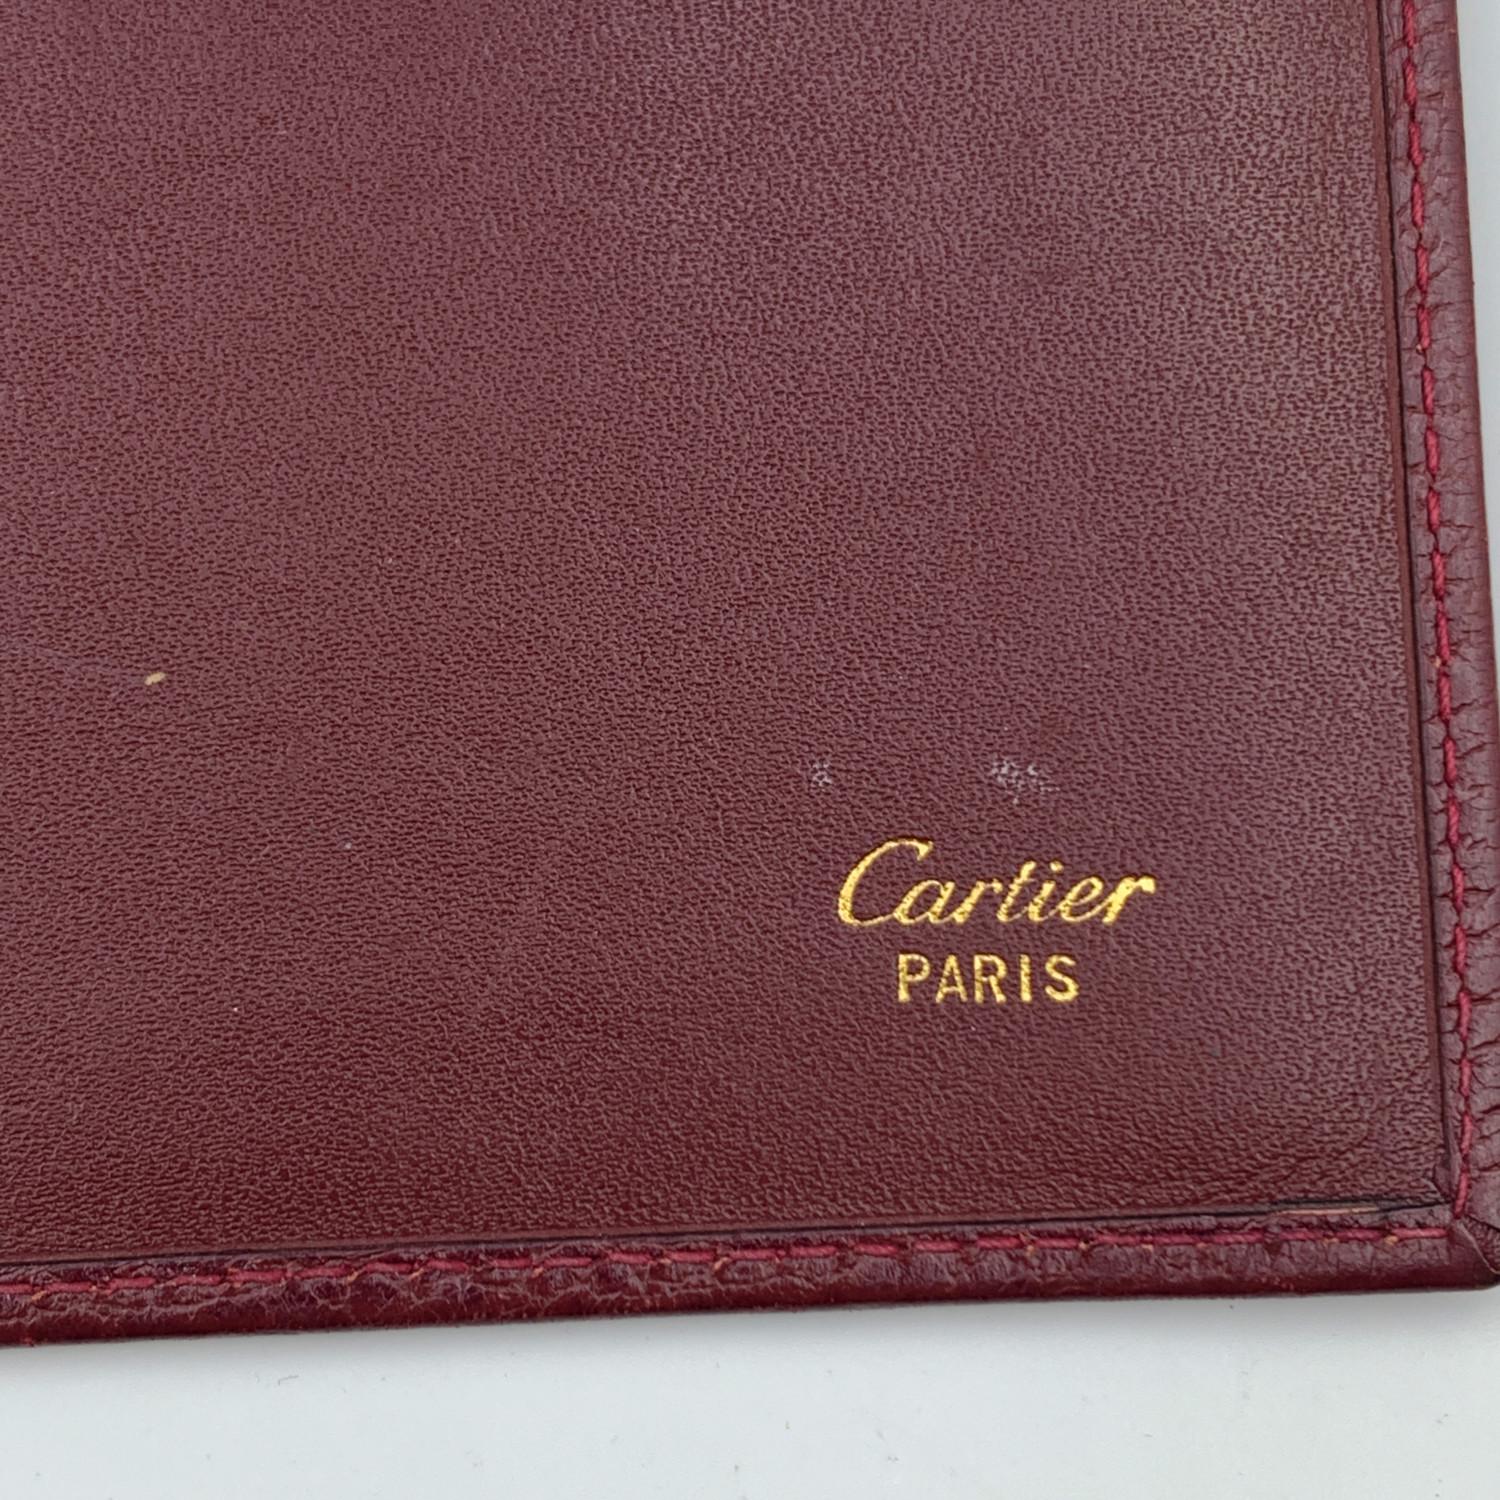 Cartier Burgundy Leather Checkbook Credit Card Wallet. Burgundy leather. cartier logo embossed on leather on the front. 4 credit card slots. 2 open compartments. 'Cartier Paris' embossed inside


Details

MATERIAL: Leather

COLOR: Burgundy

MODEL: